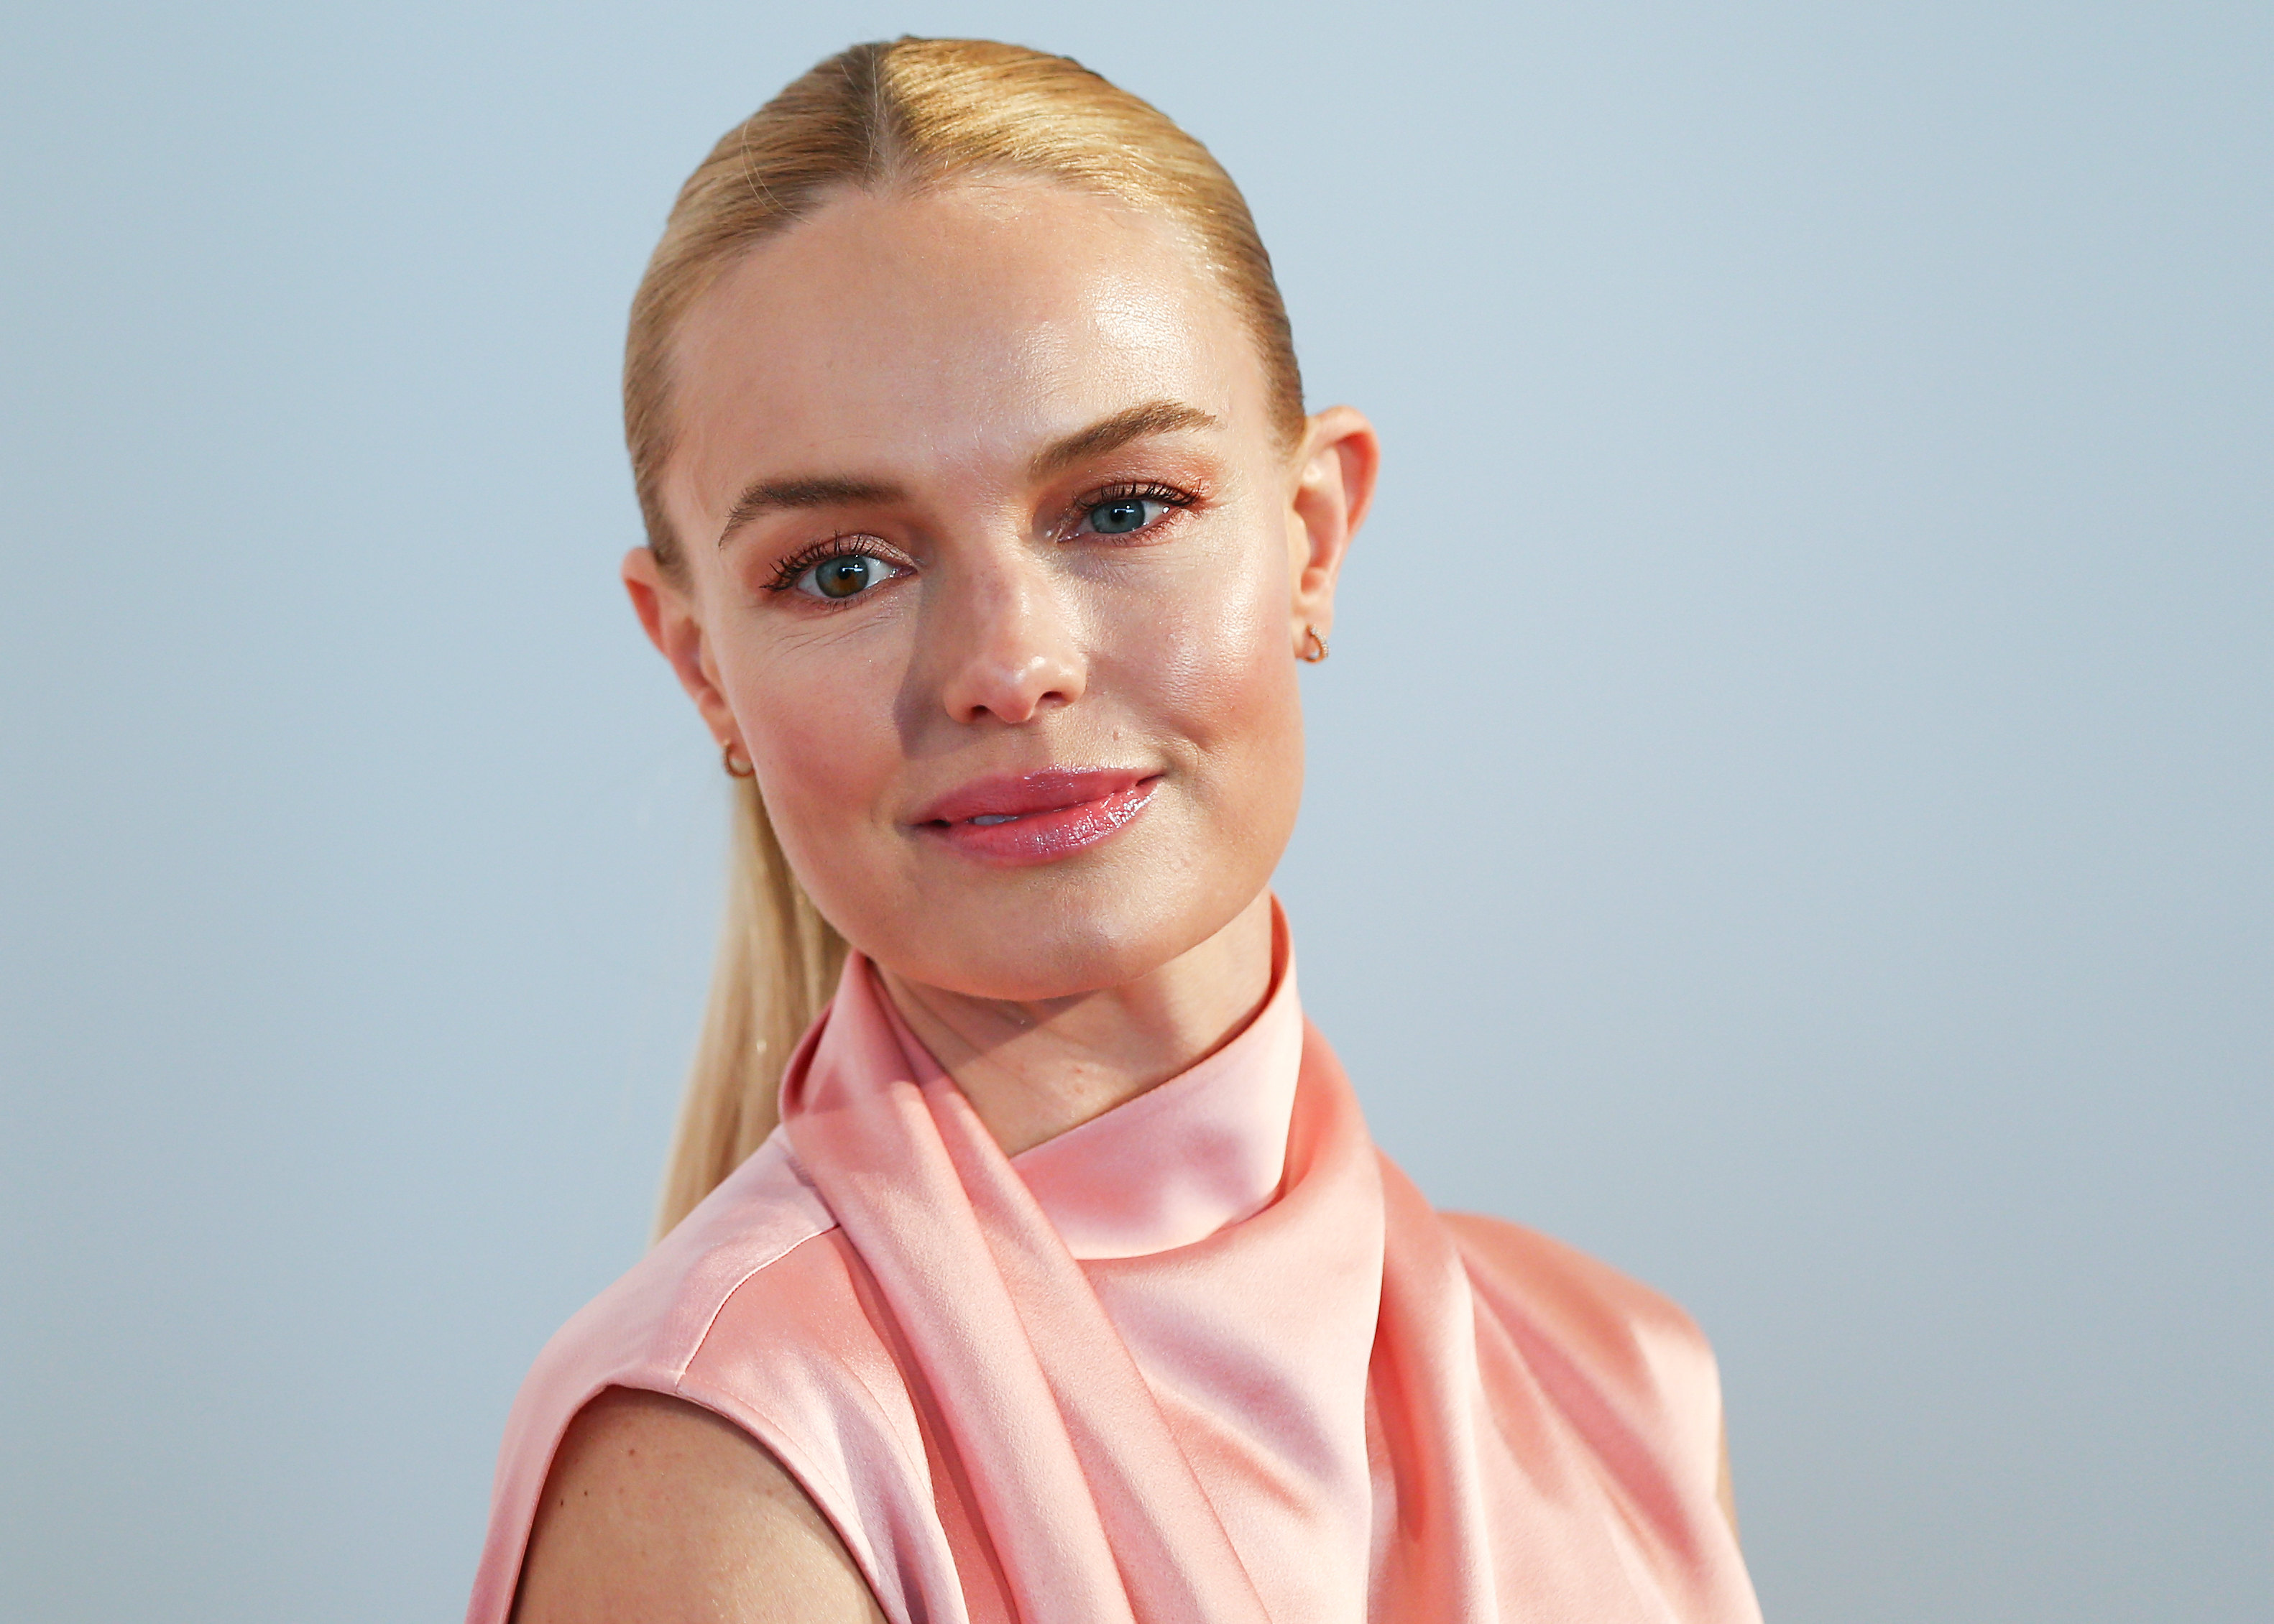 Kate Bosworth attends the Veuve Clicquot Business Woman Award at Museum of Contemporary Art on July 2, 2019, in Sydney, Australia. | Source: Getty Images